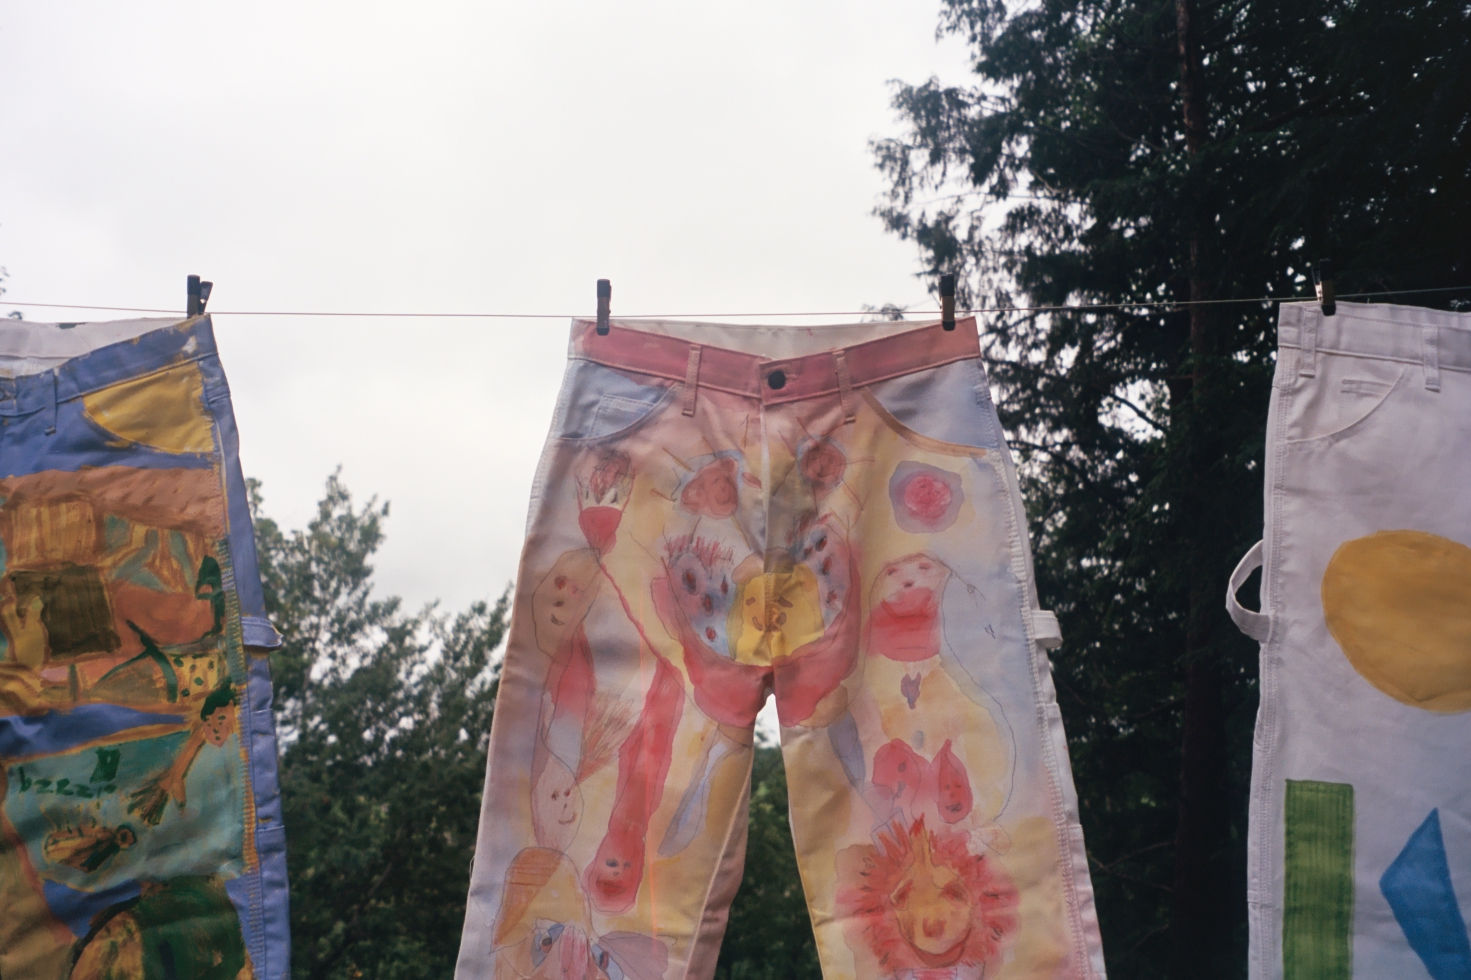 pants hanging from clothesline